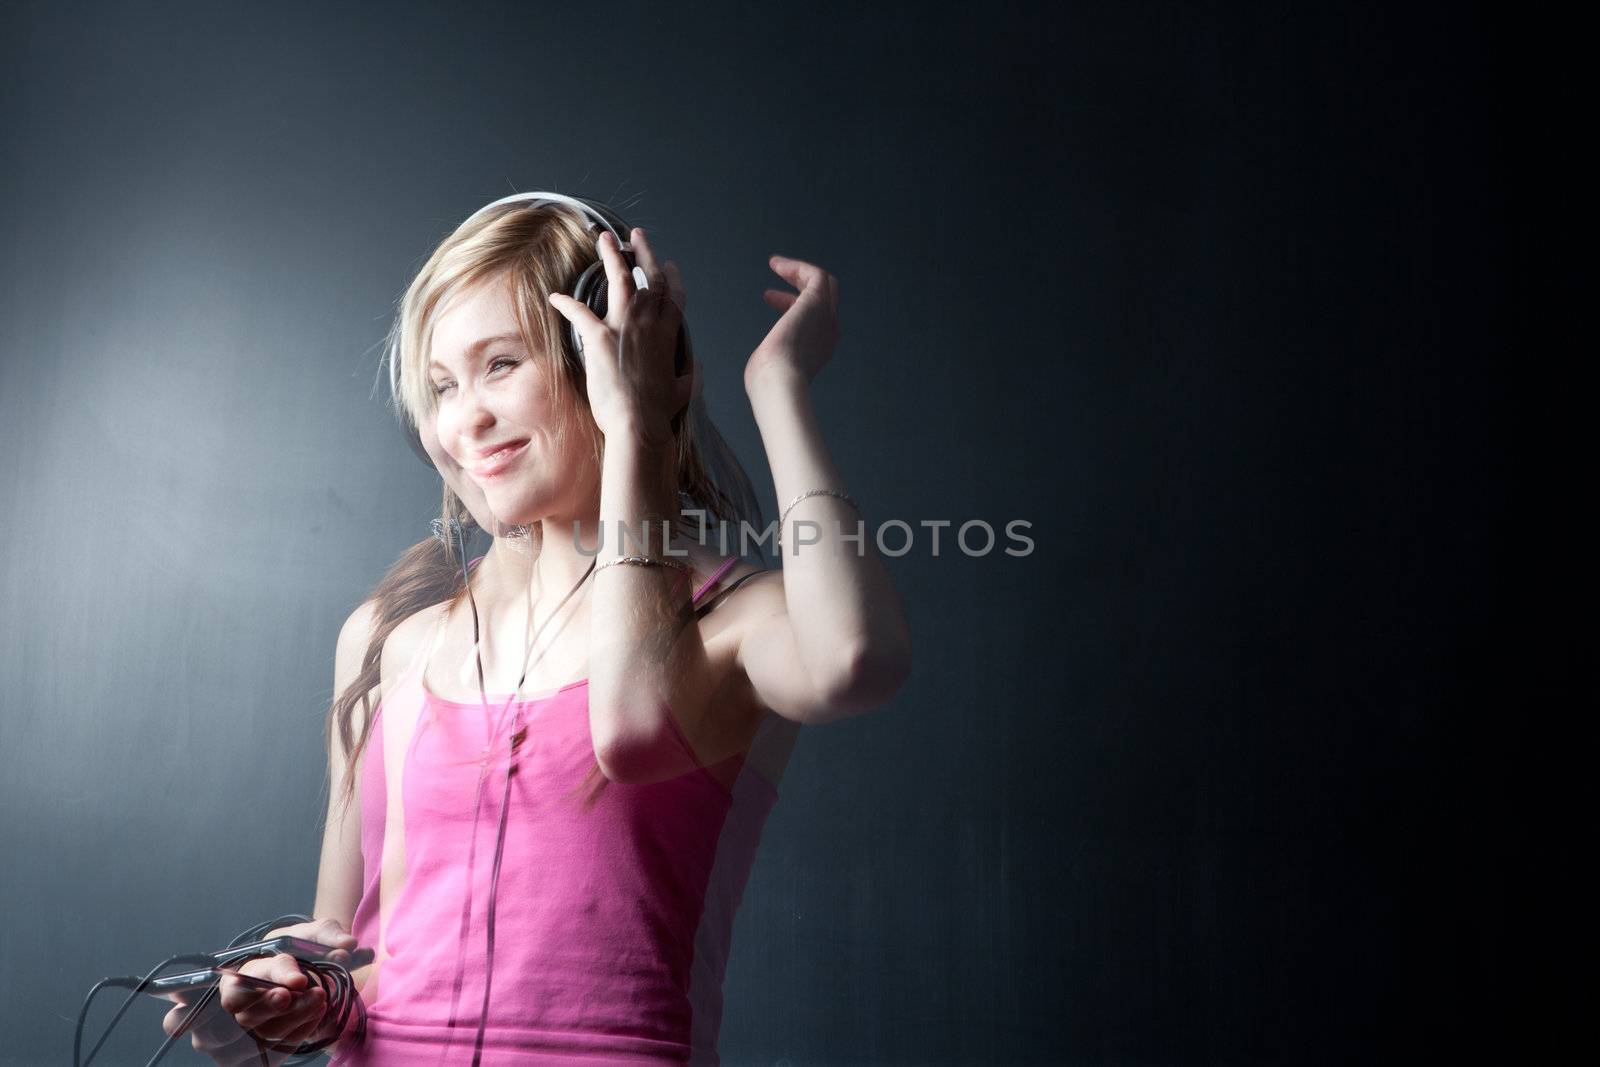 Music please! - Portrait of a pretty young woman/teenager listening to music on her hi-end headphones, enjoying the groove (multiple esposure shot)